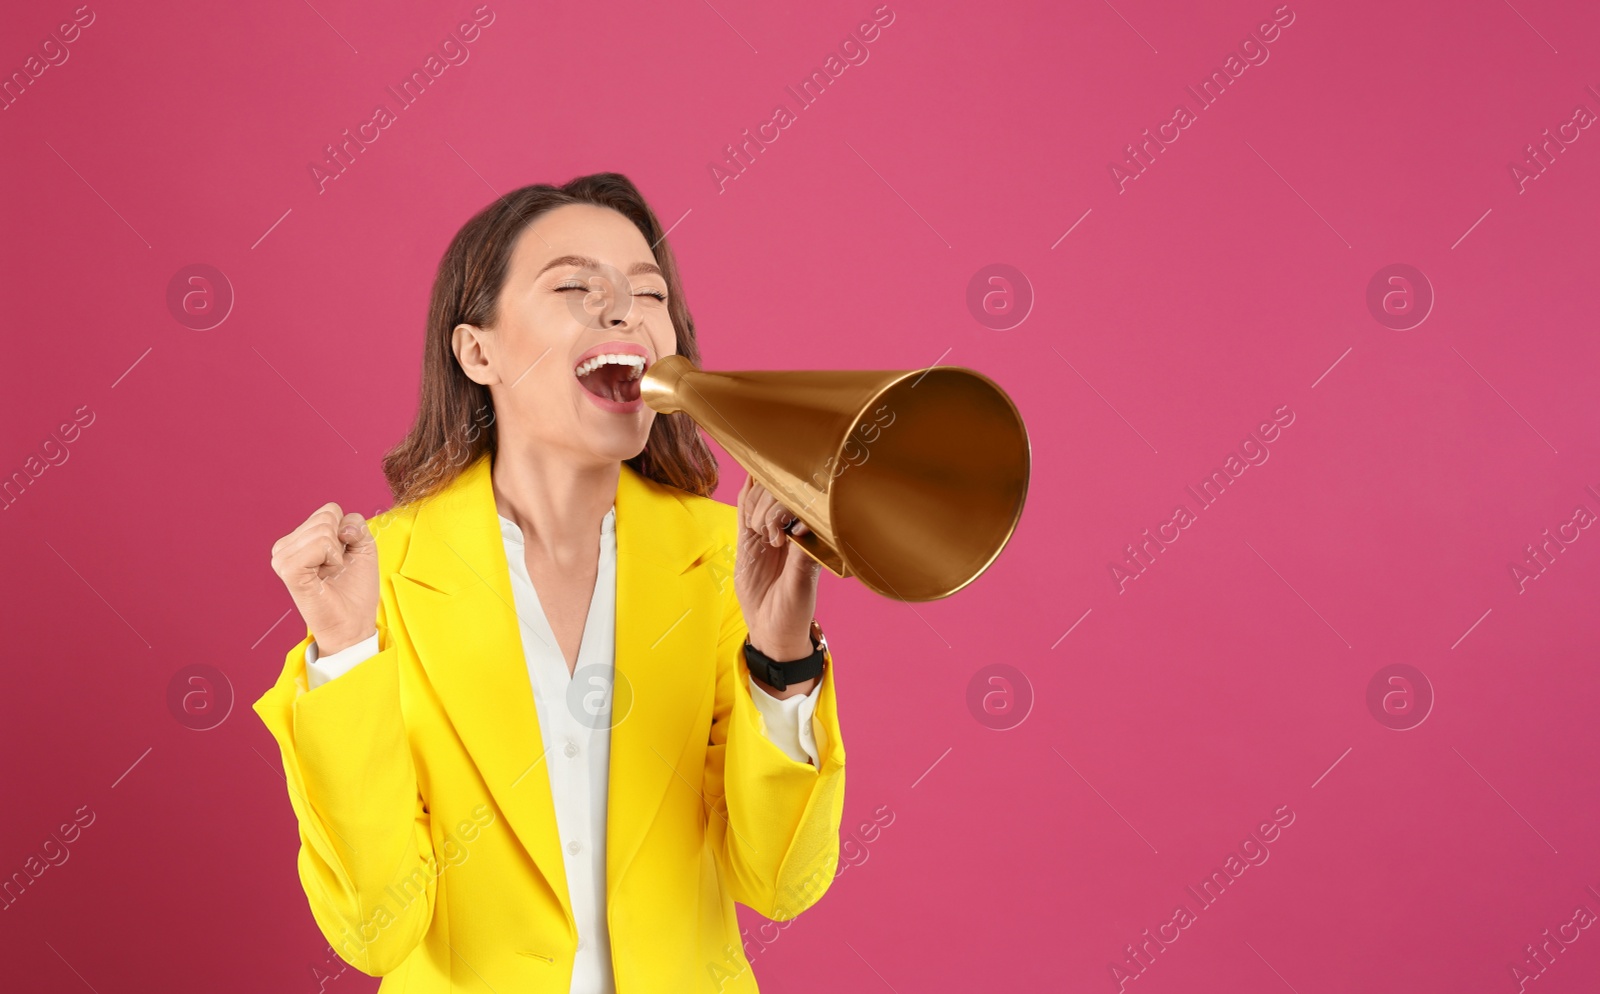 Photo of Young woman with megaphone on pink background